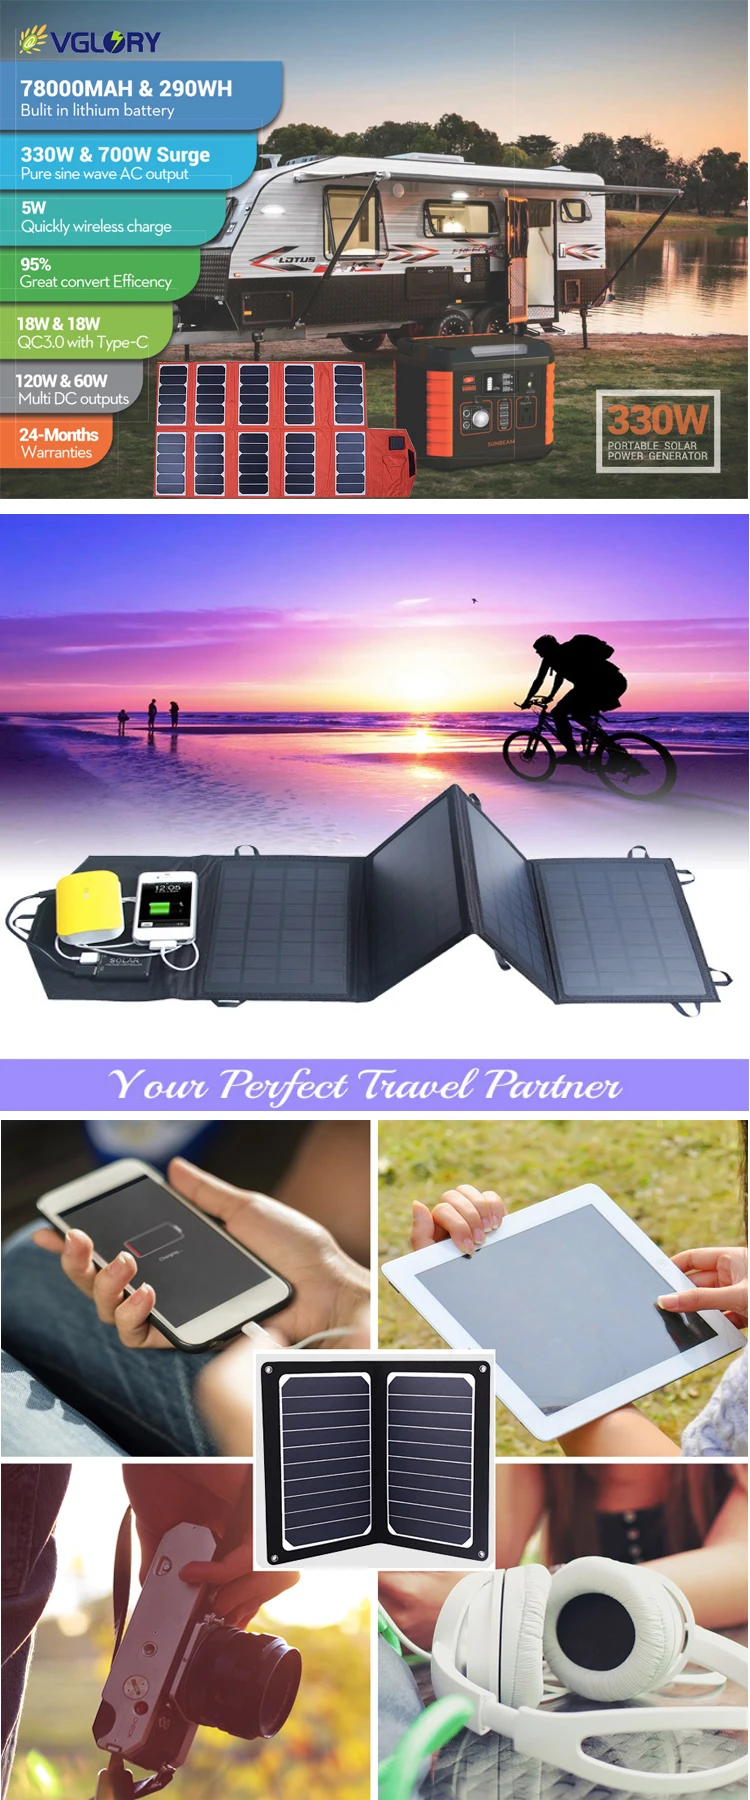 List Bendable 18v 100w Gh In China Long Life 45w Support Foldable Solar Panel For Laptop Charging